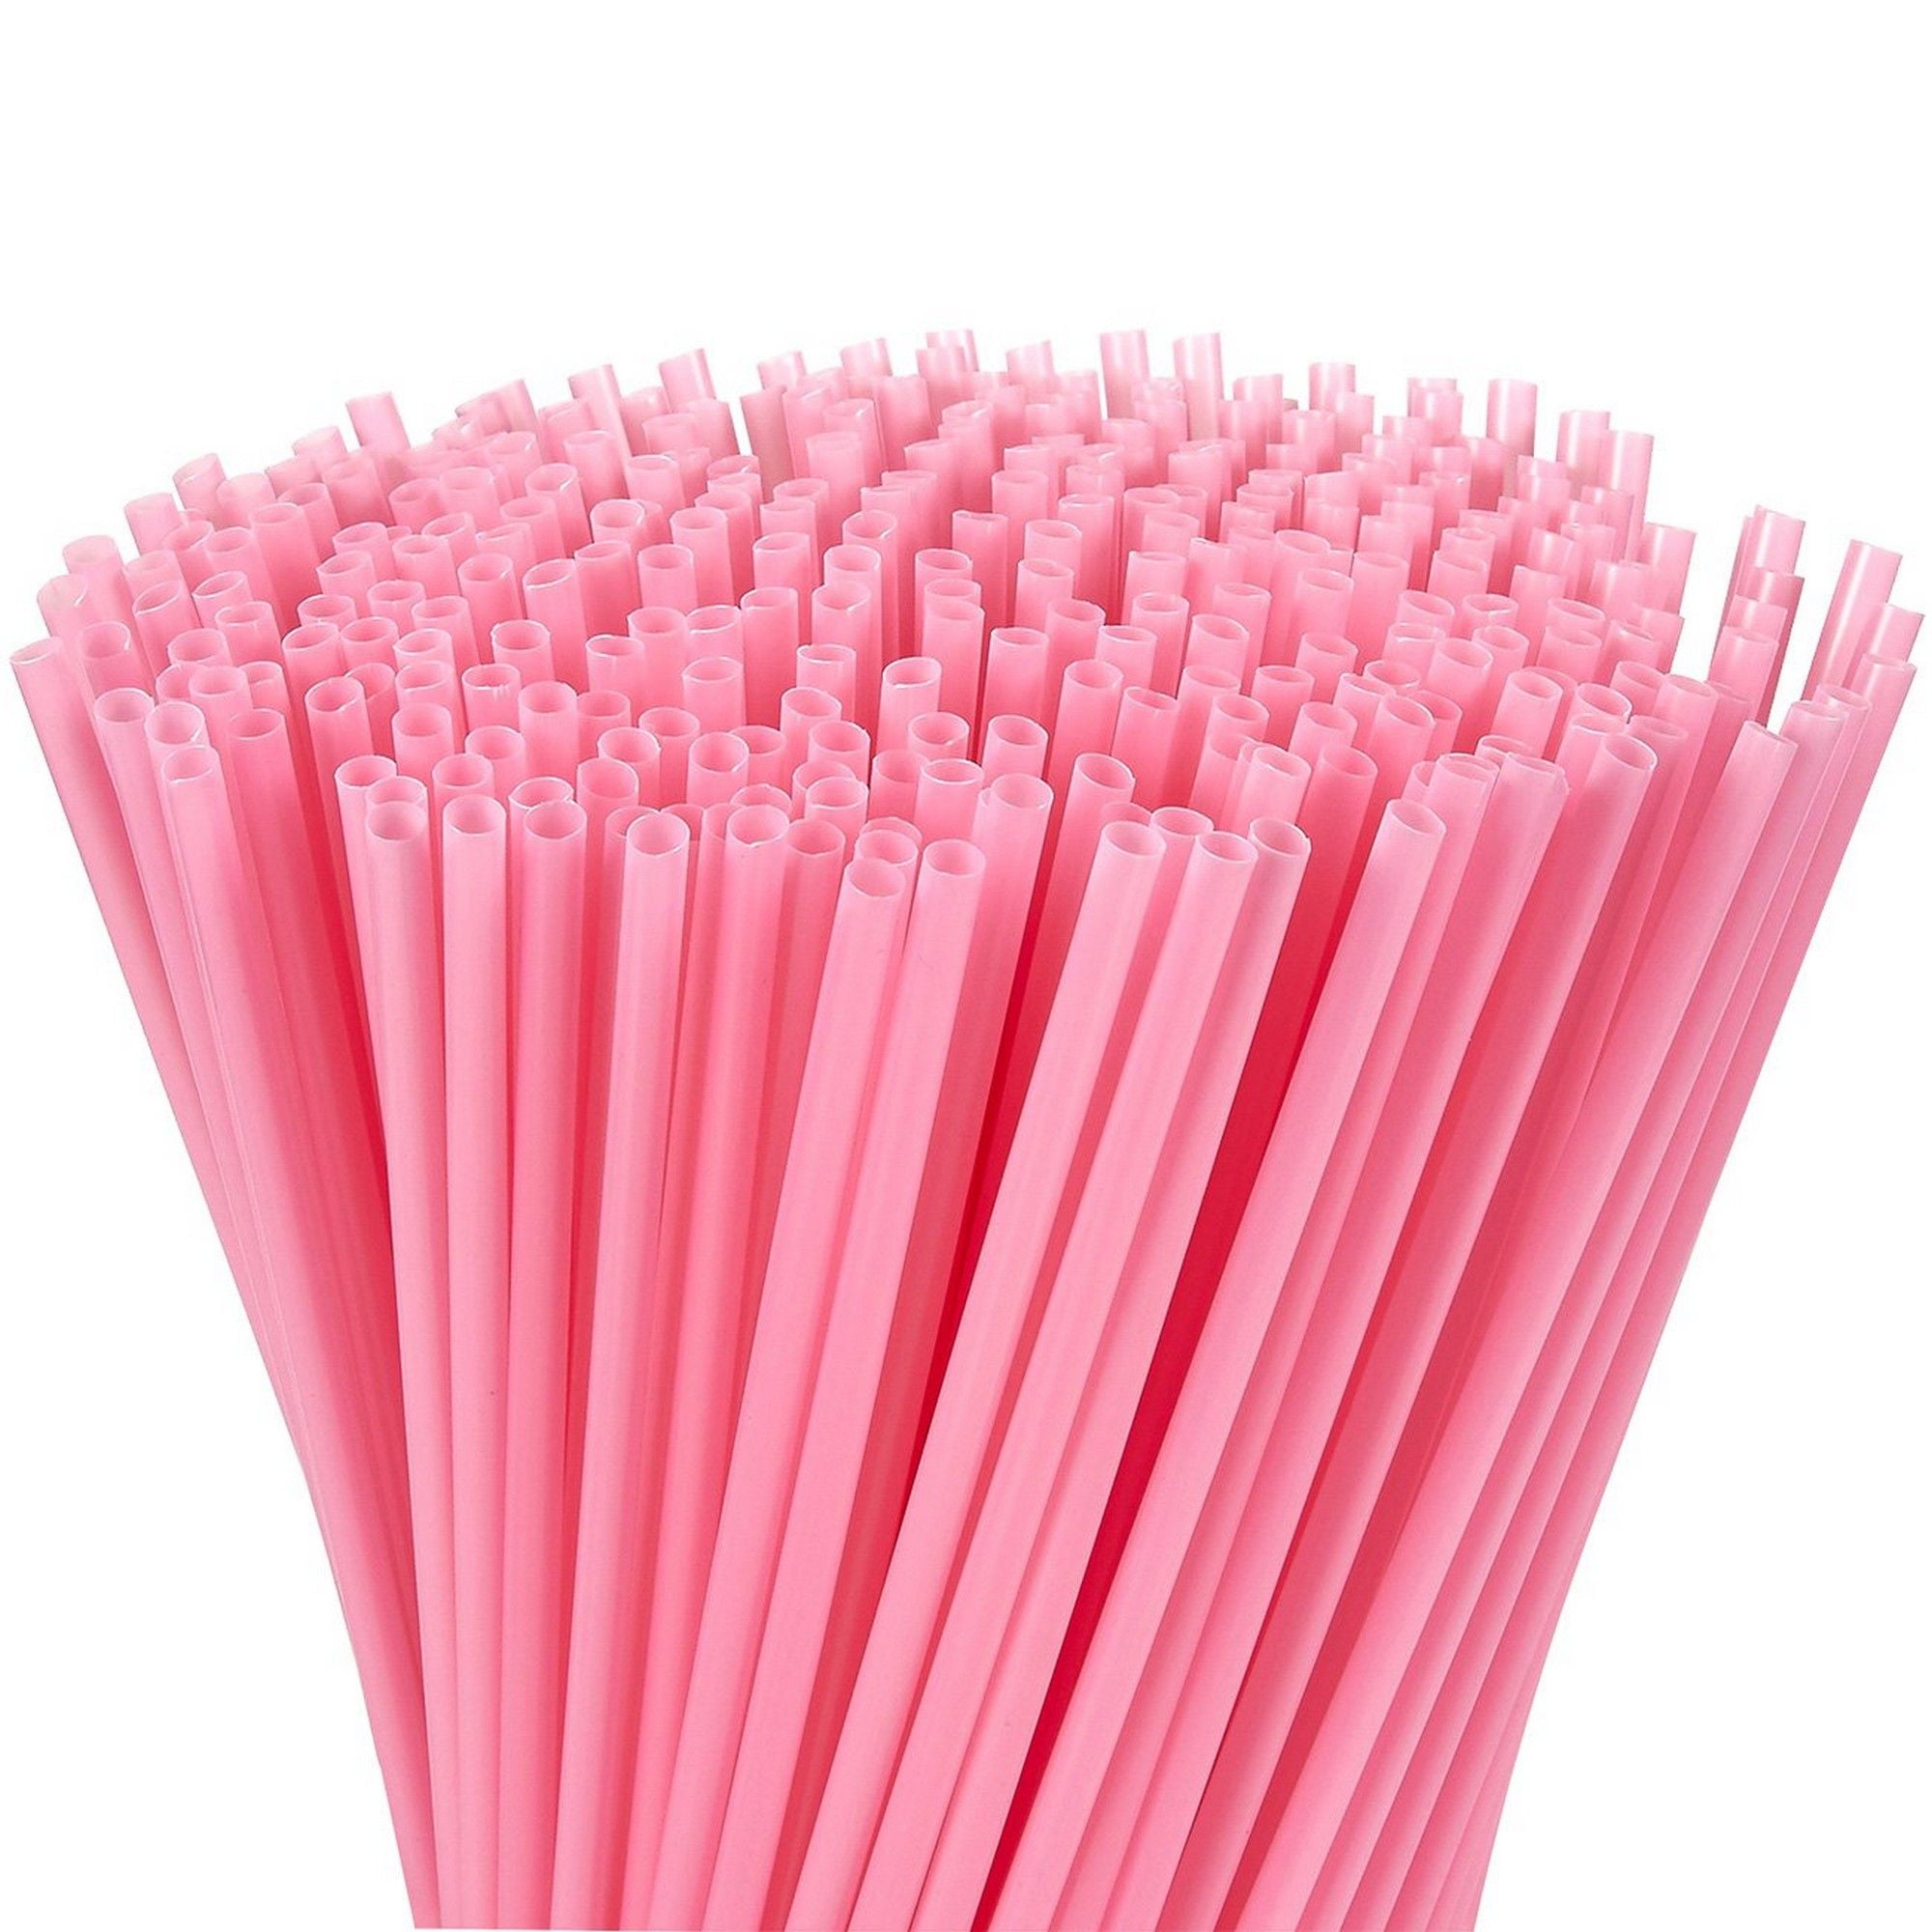 Details about   Party Straws Flexible Plastic Bendy Party Disposable Juice Drinking Straws BM